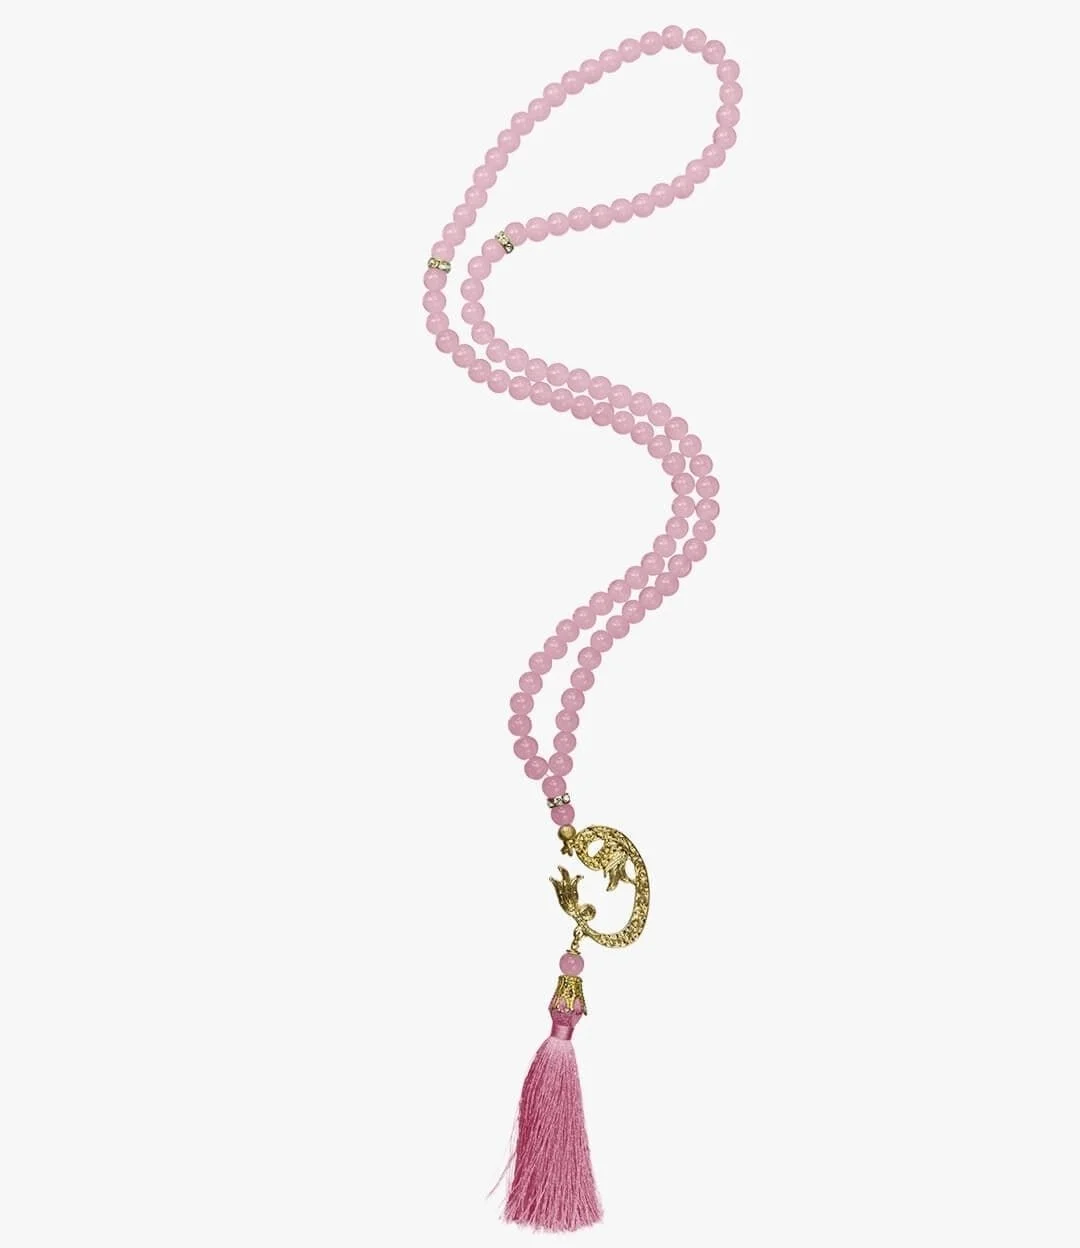 W for Wadood Prayer Beads - Love of God  - Pink by Fofinha